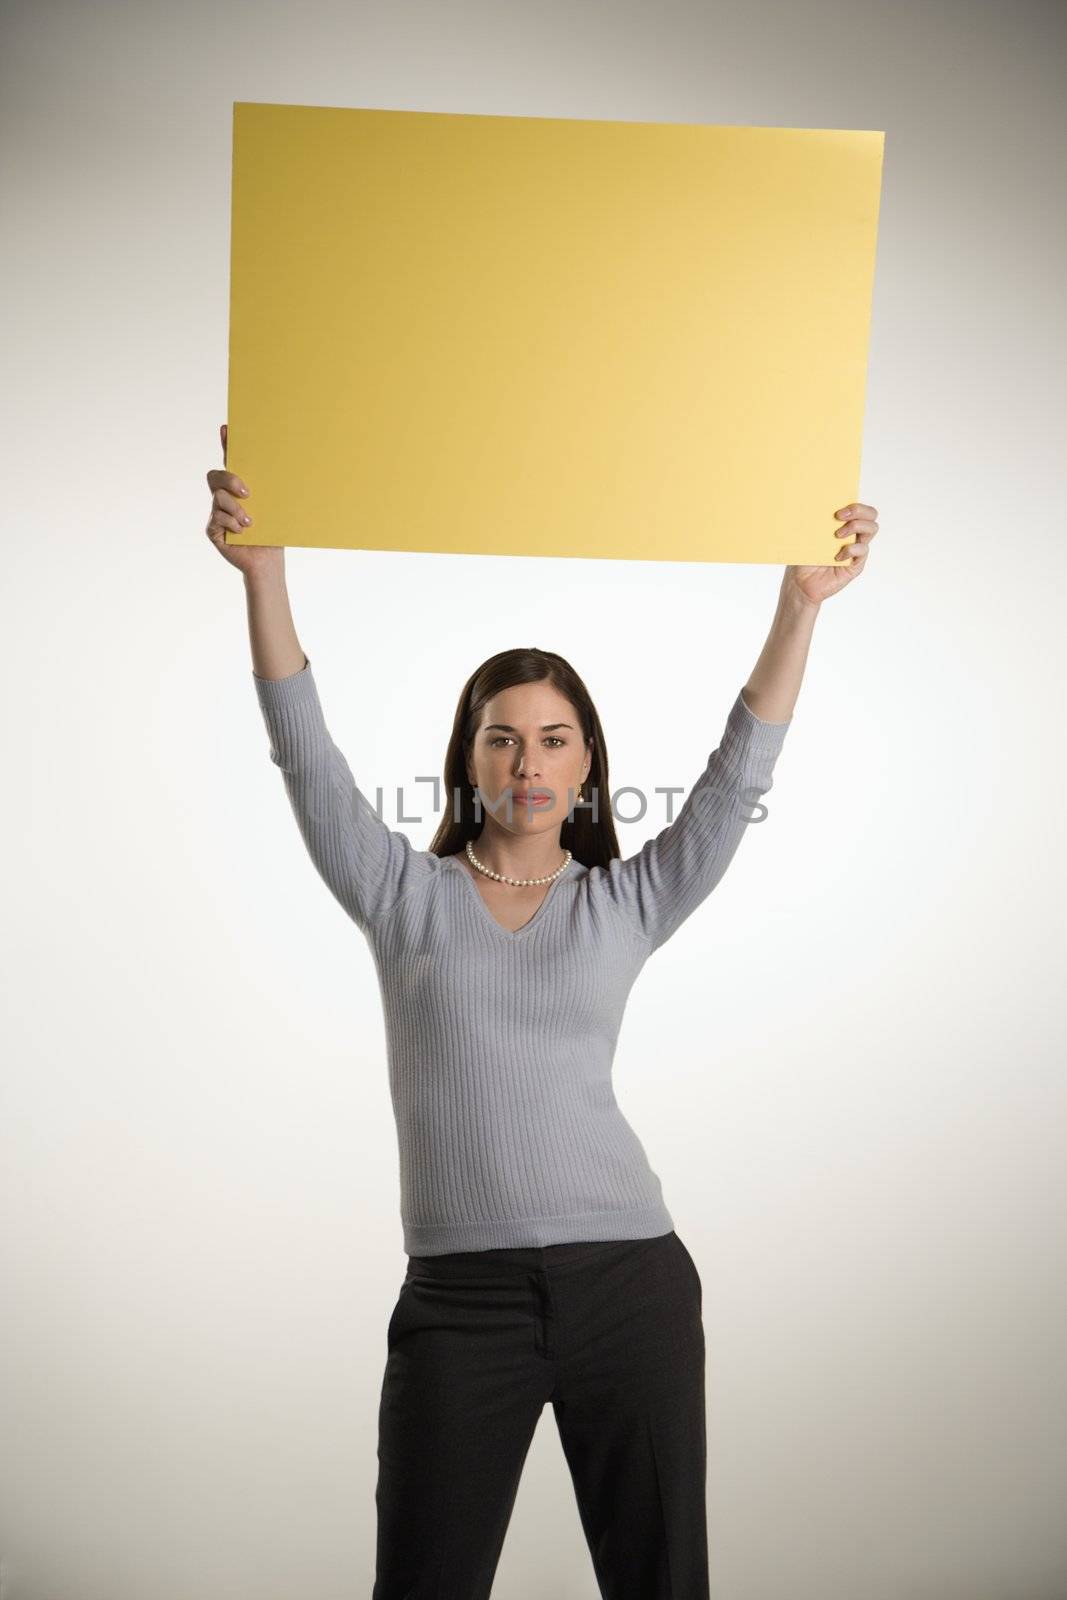 Caucasian mid adult professional business woman standing holding up blank yellow sign above her head.